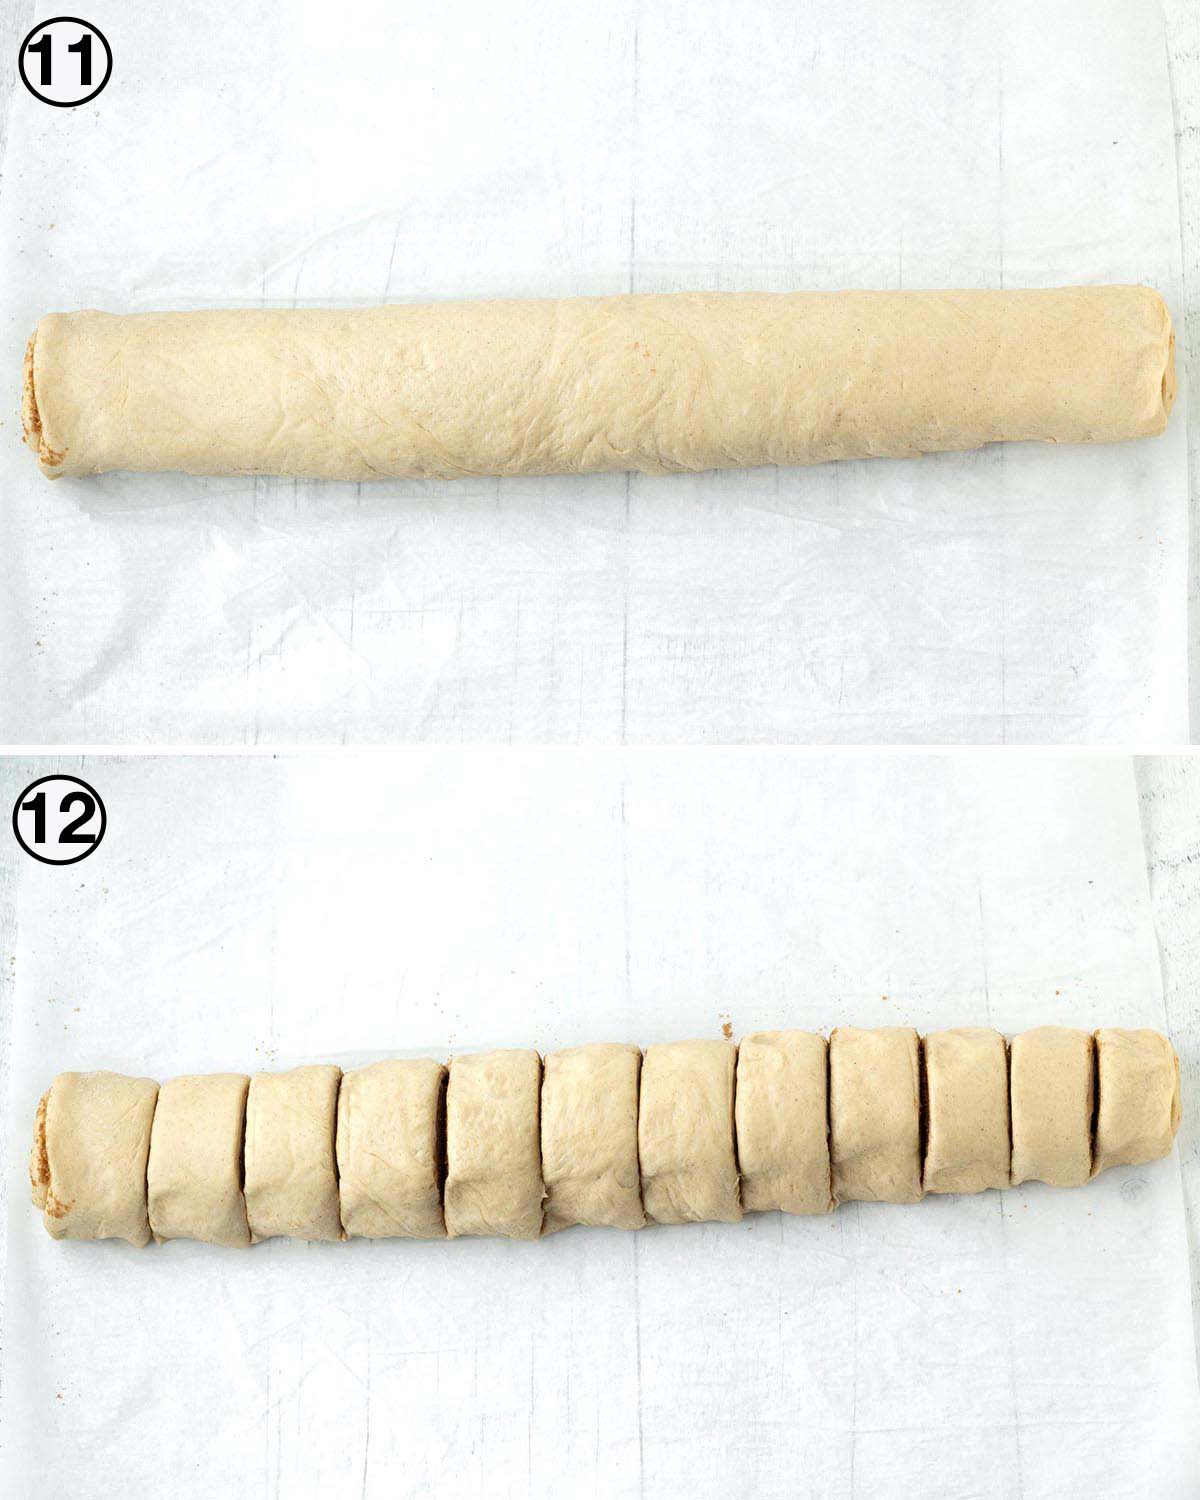 A collage of two images showing the sixth sequence of steps needed to make vegan cinnamon rolls.